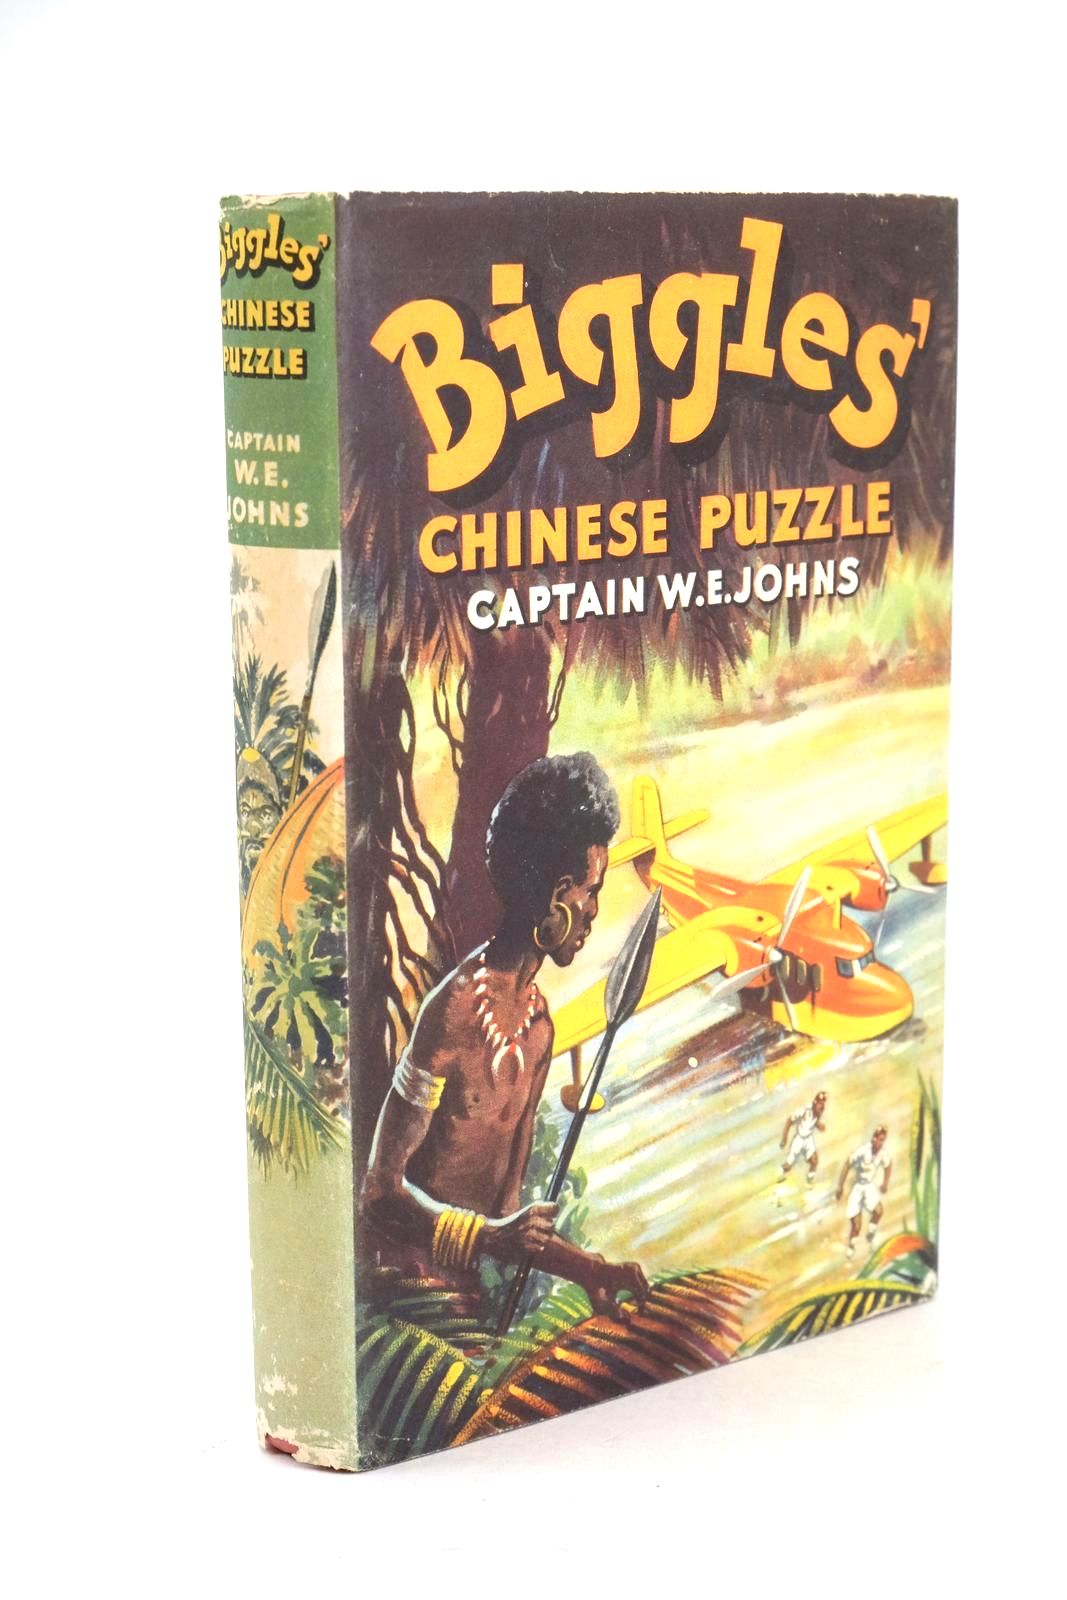 Photo of BIGGLES' CHINESE PUZZLE written by Johns, W.E. illustrated by Stead, Leslie published by The Children's Book Club (STOCK CODE: 1326288)  for sale by Stella & Rose's Books